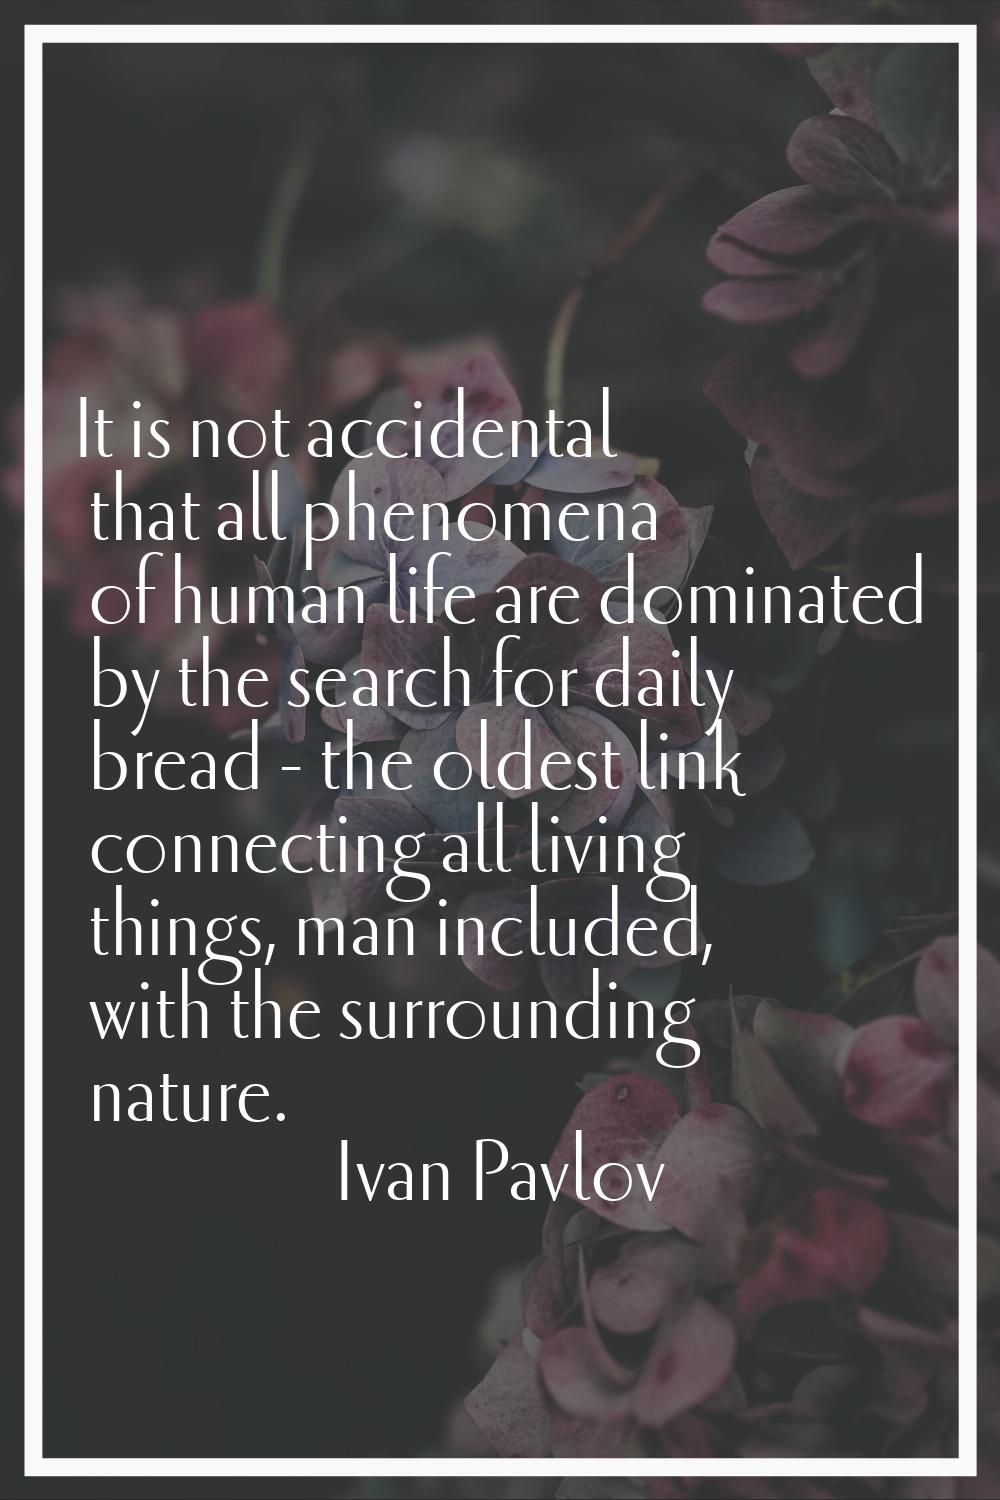 It is not accidental that all phenomena of human life are dominated by the search for daily bread -